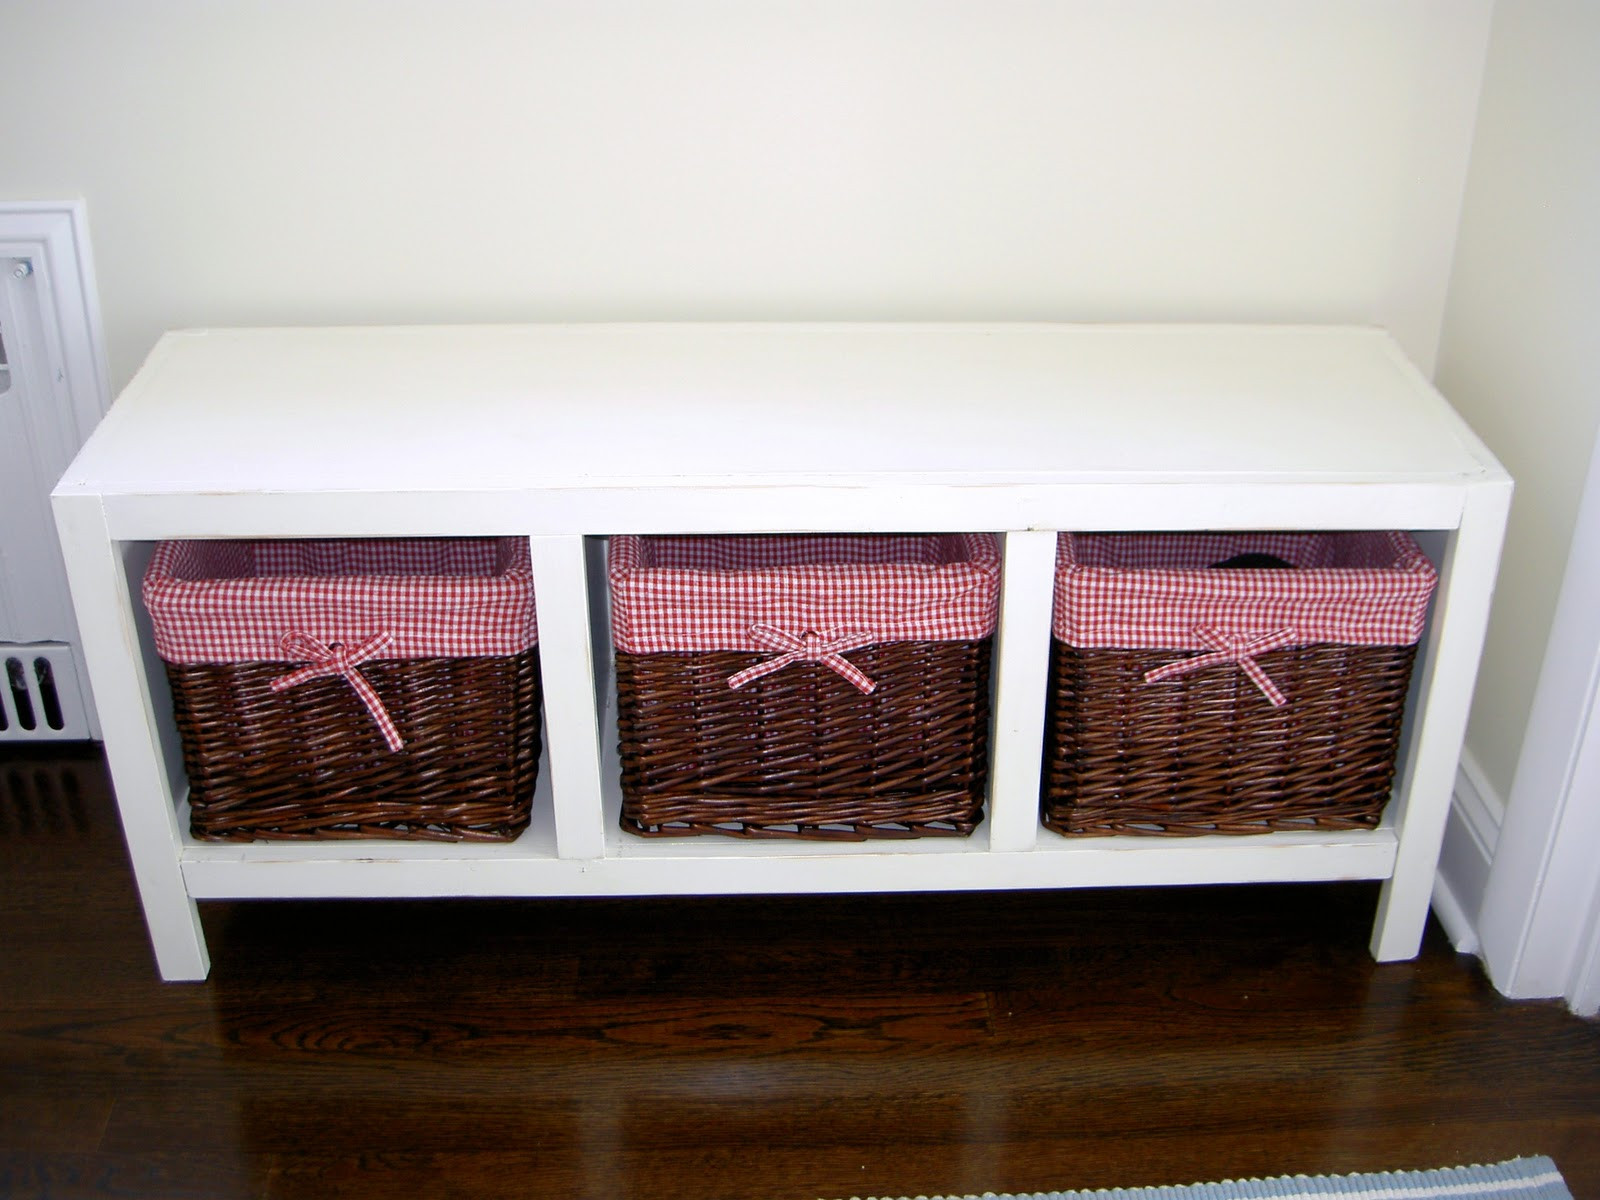 Diy Benches With Storage
 That s My Letter DIY Bench with Storage Baskets